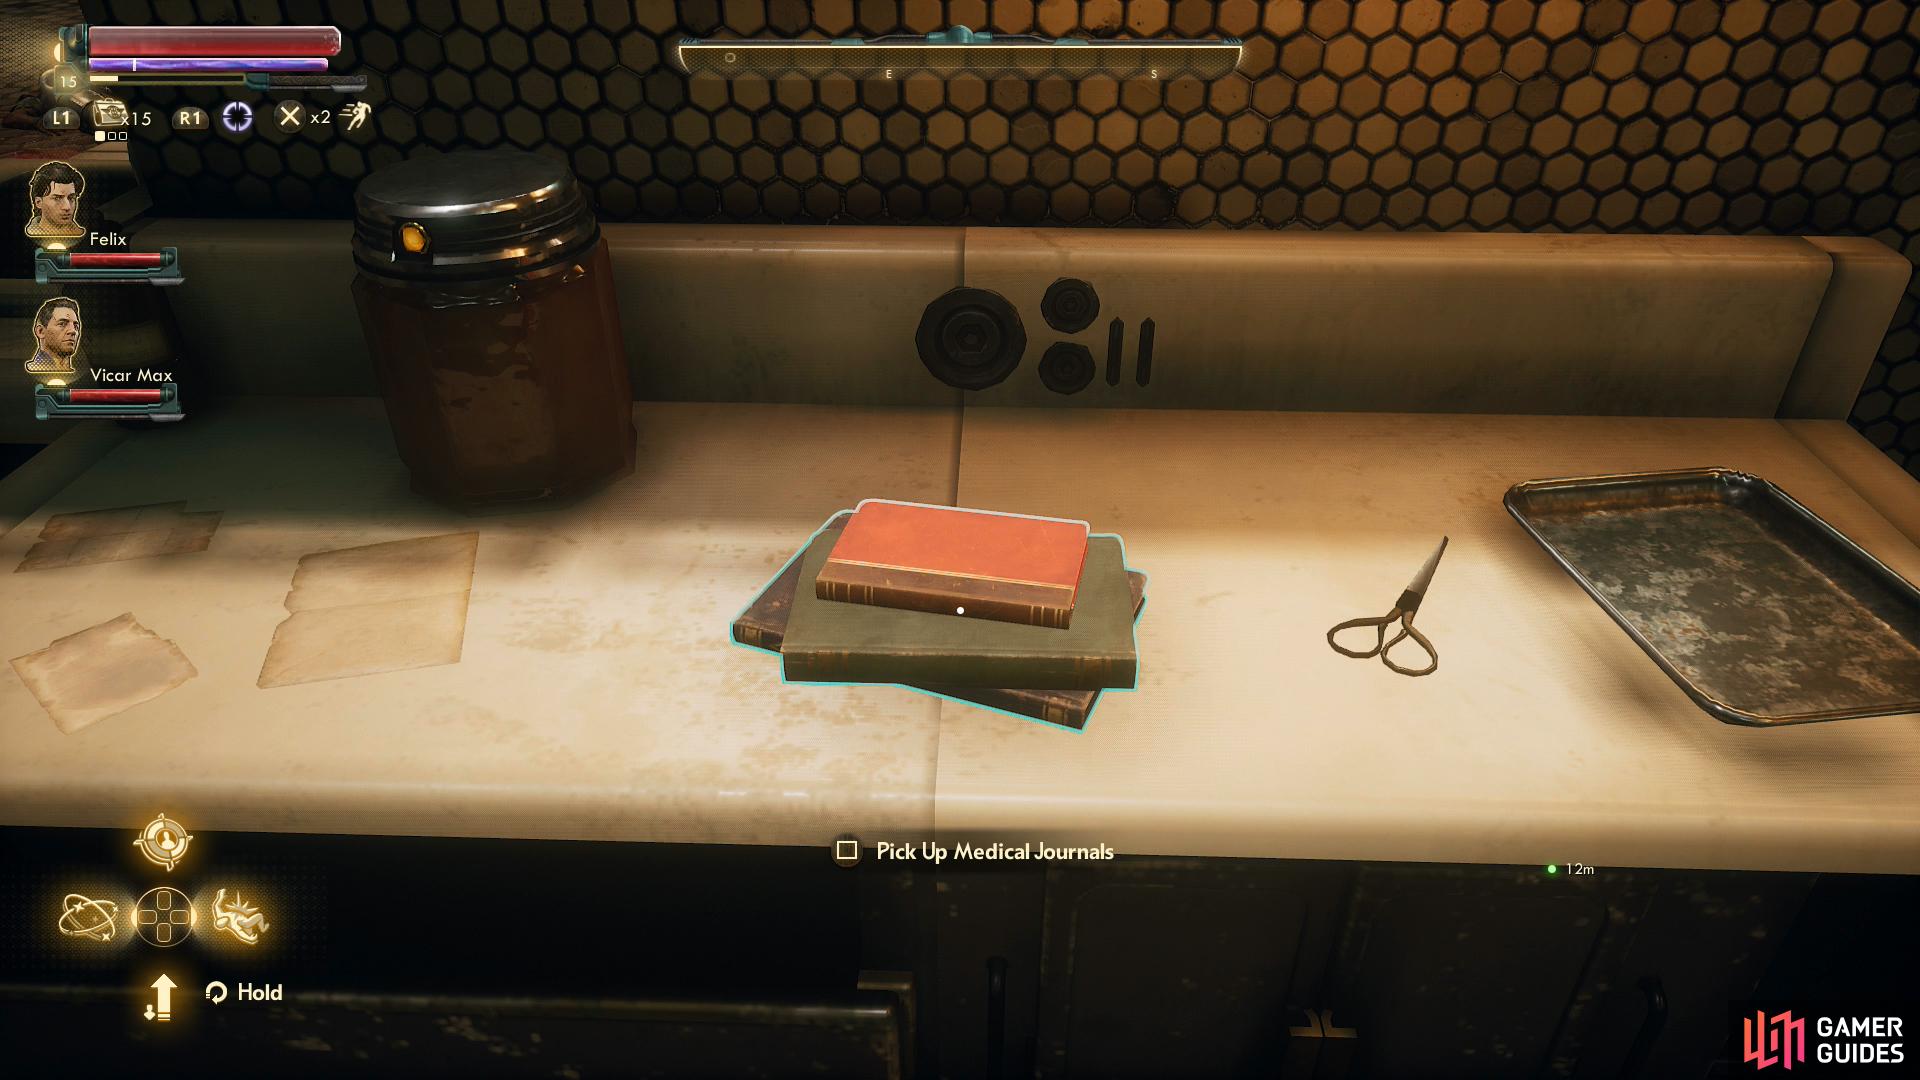 While there's not much of note to loot in the lab you can find some Medical Journals to decorate the Unreliable with.